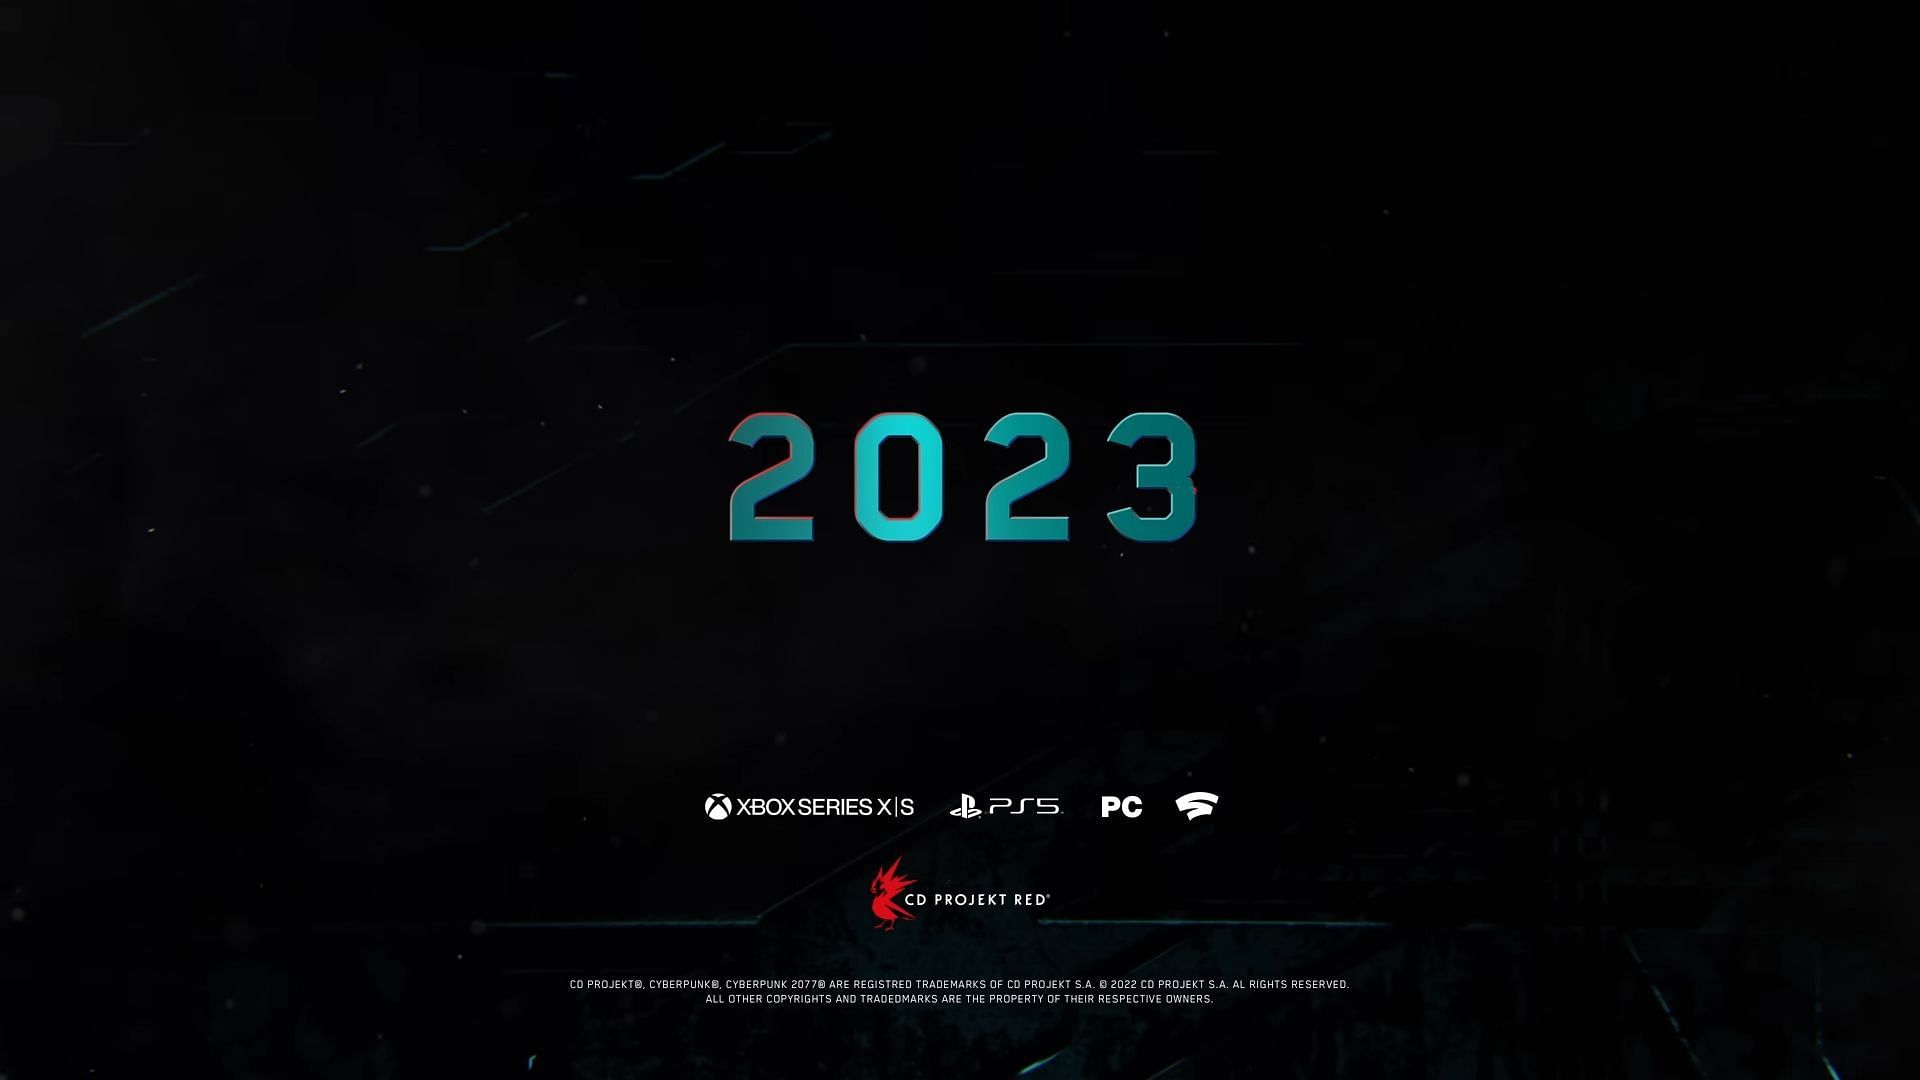 Phantom Liberty will arrive in 2023 for current-gen consoles, PC, and Stadia (Image via CD PROJEKT RED)